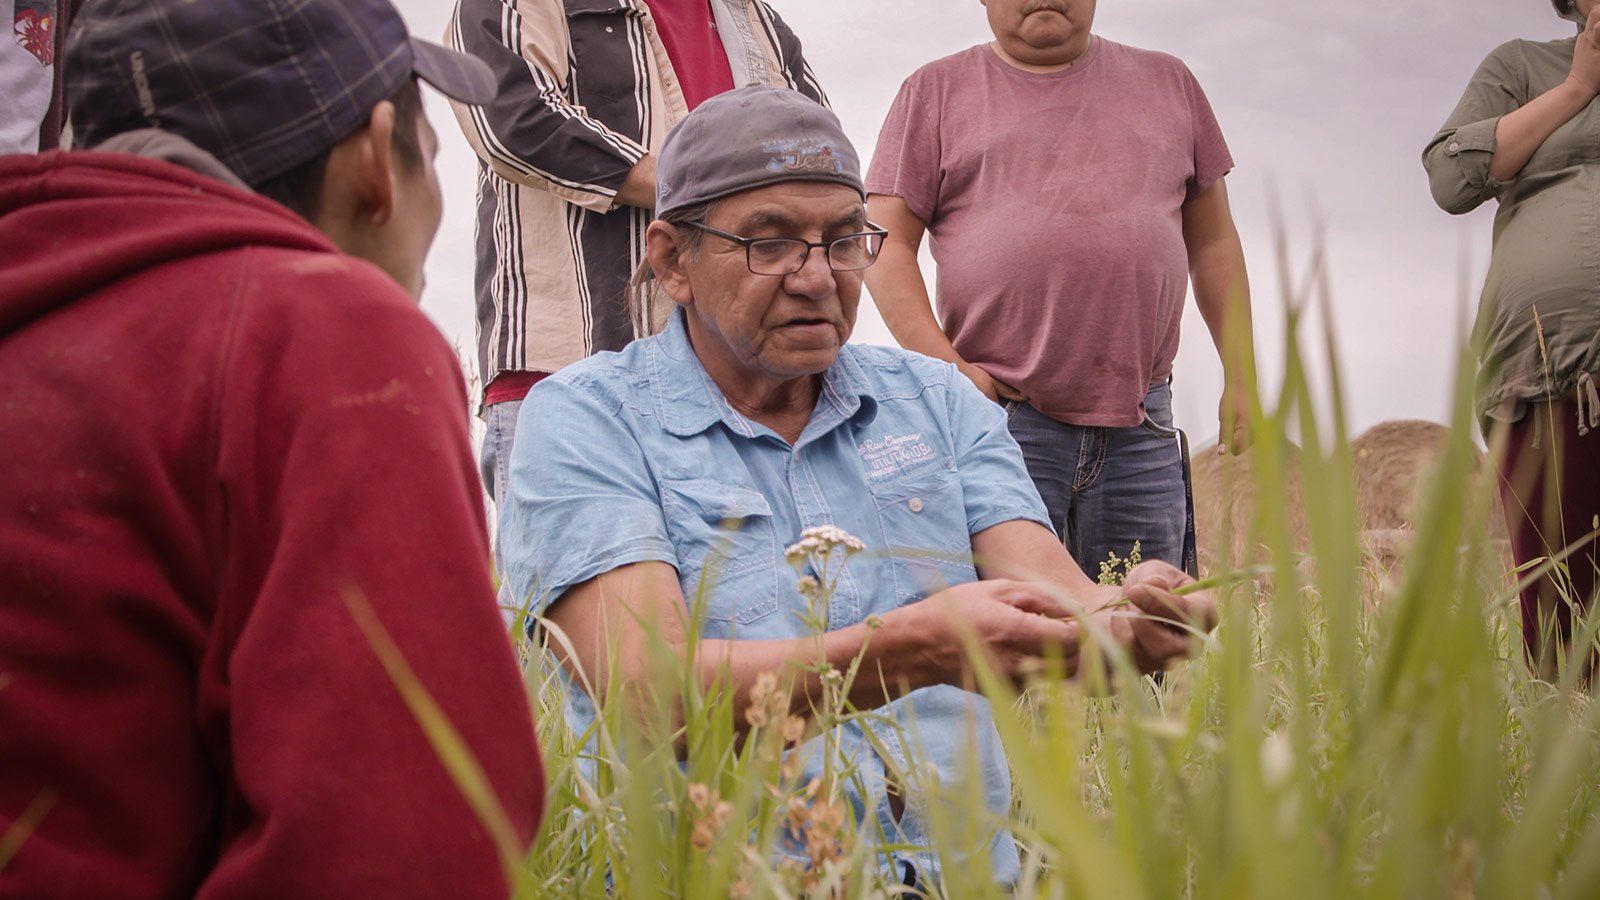 Indigenous man kneeling in tall grass and teaching others about farming